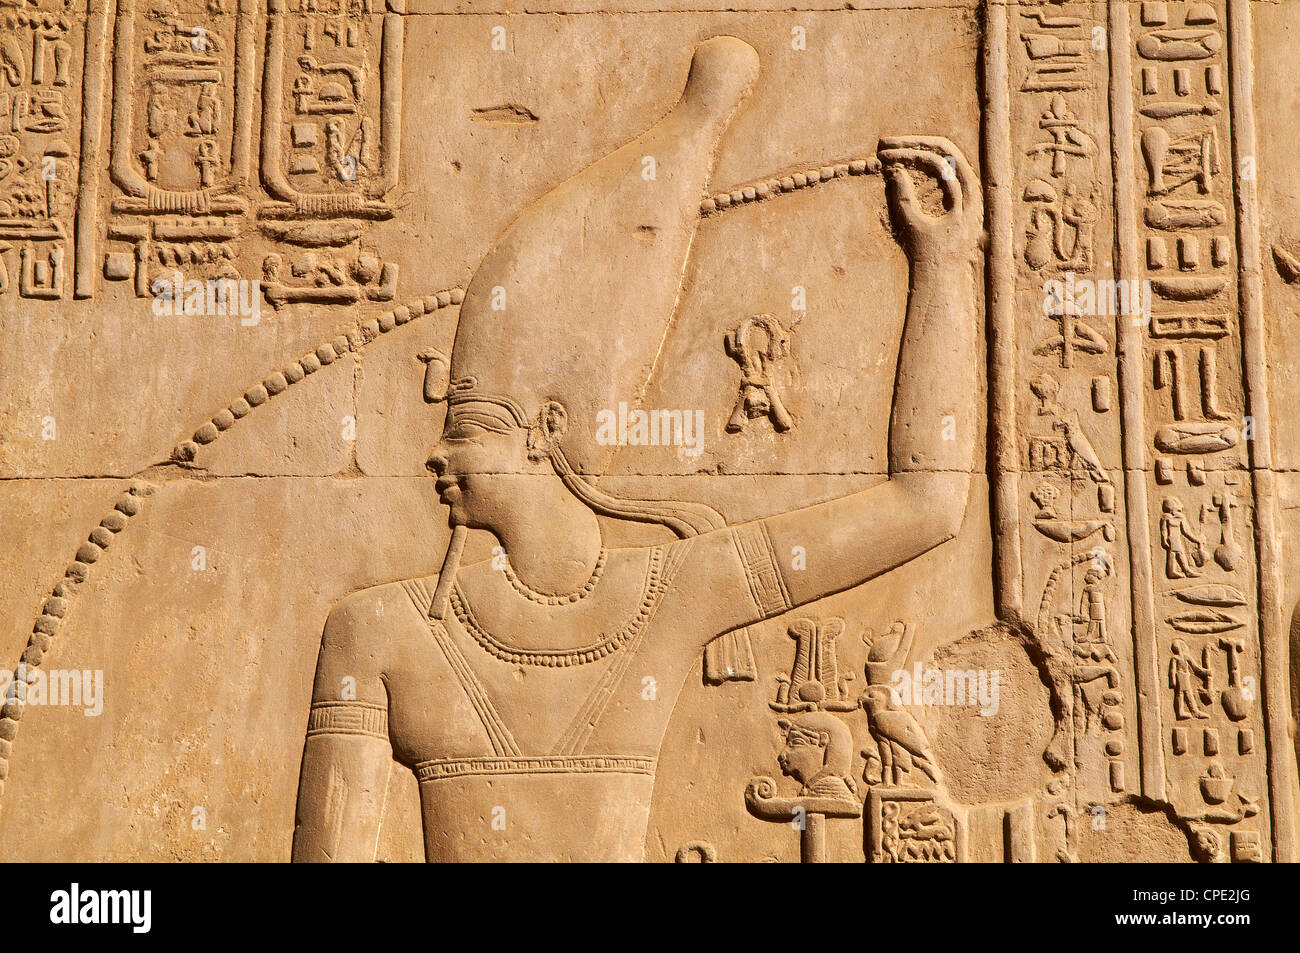 Bas relief, Temple of Sobek and Haroeris, Kom Ombo, Egypt, North Africa, Africa Stock Photo